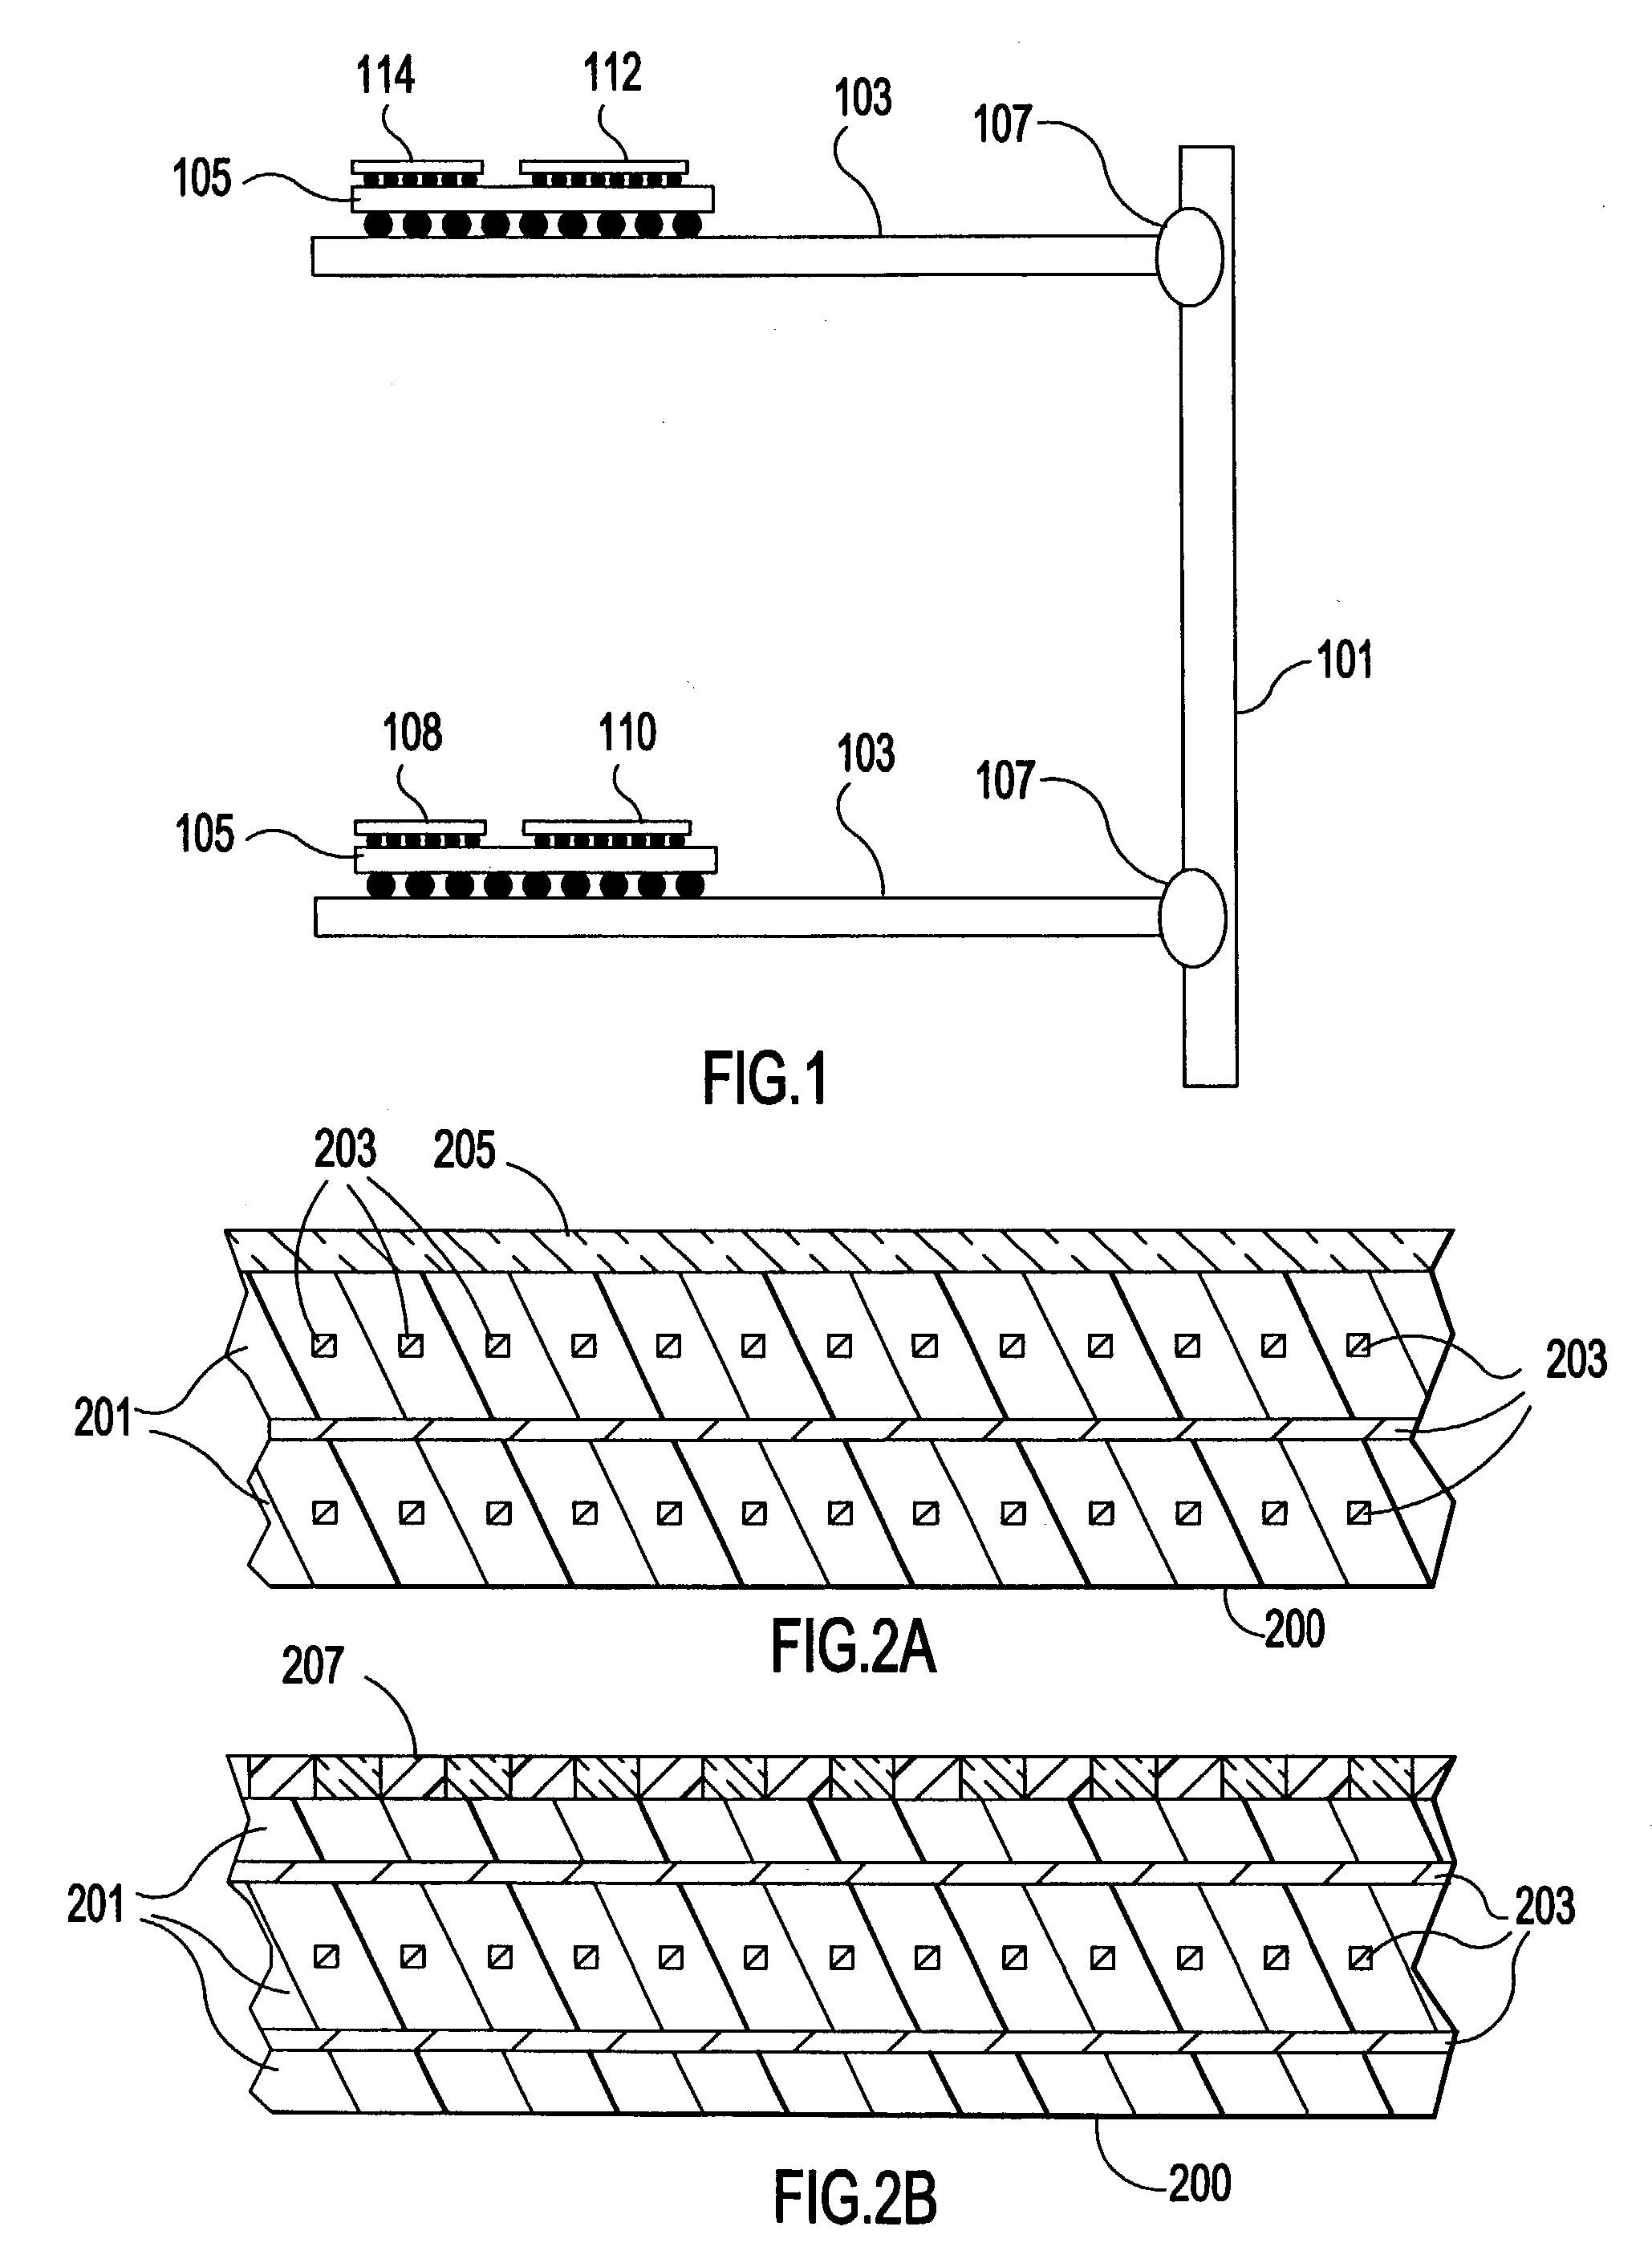 Method for in-situ continuity check on an optical bus